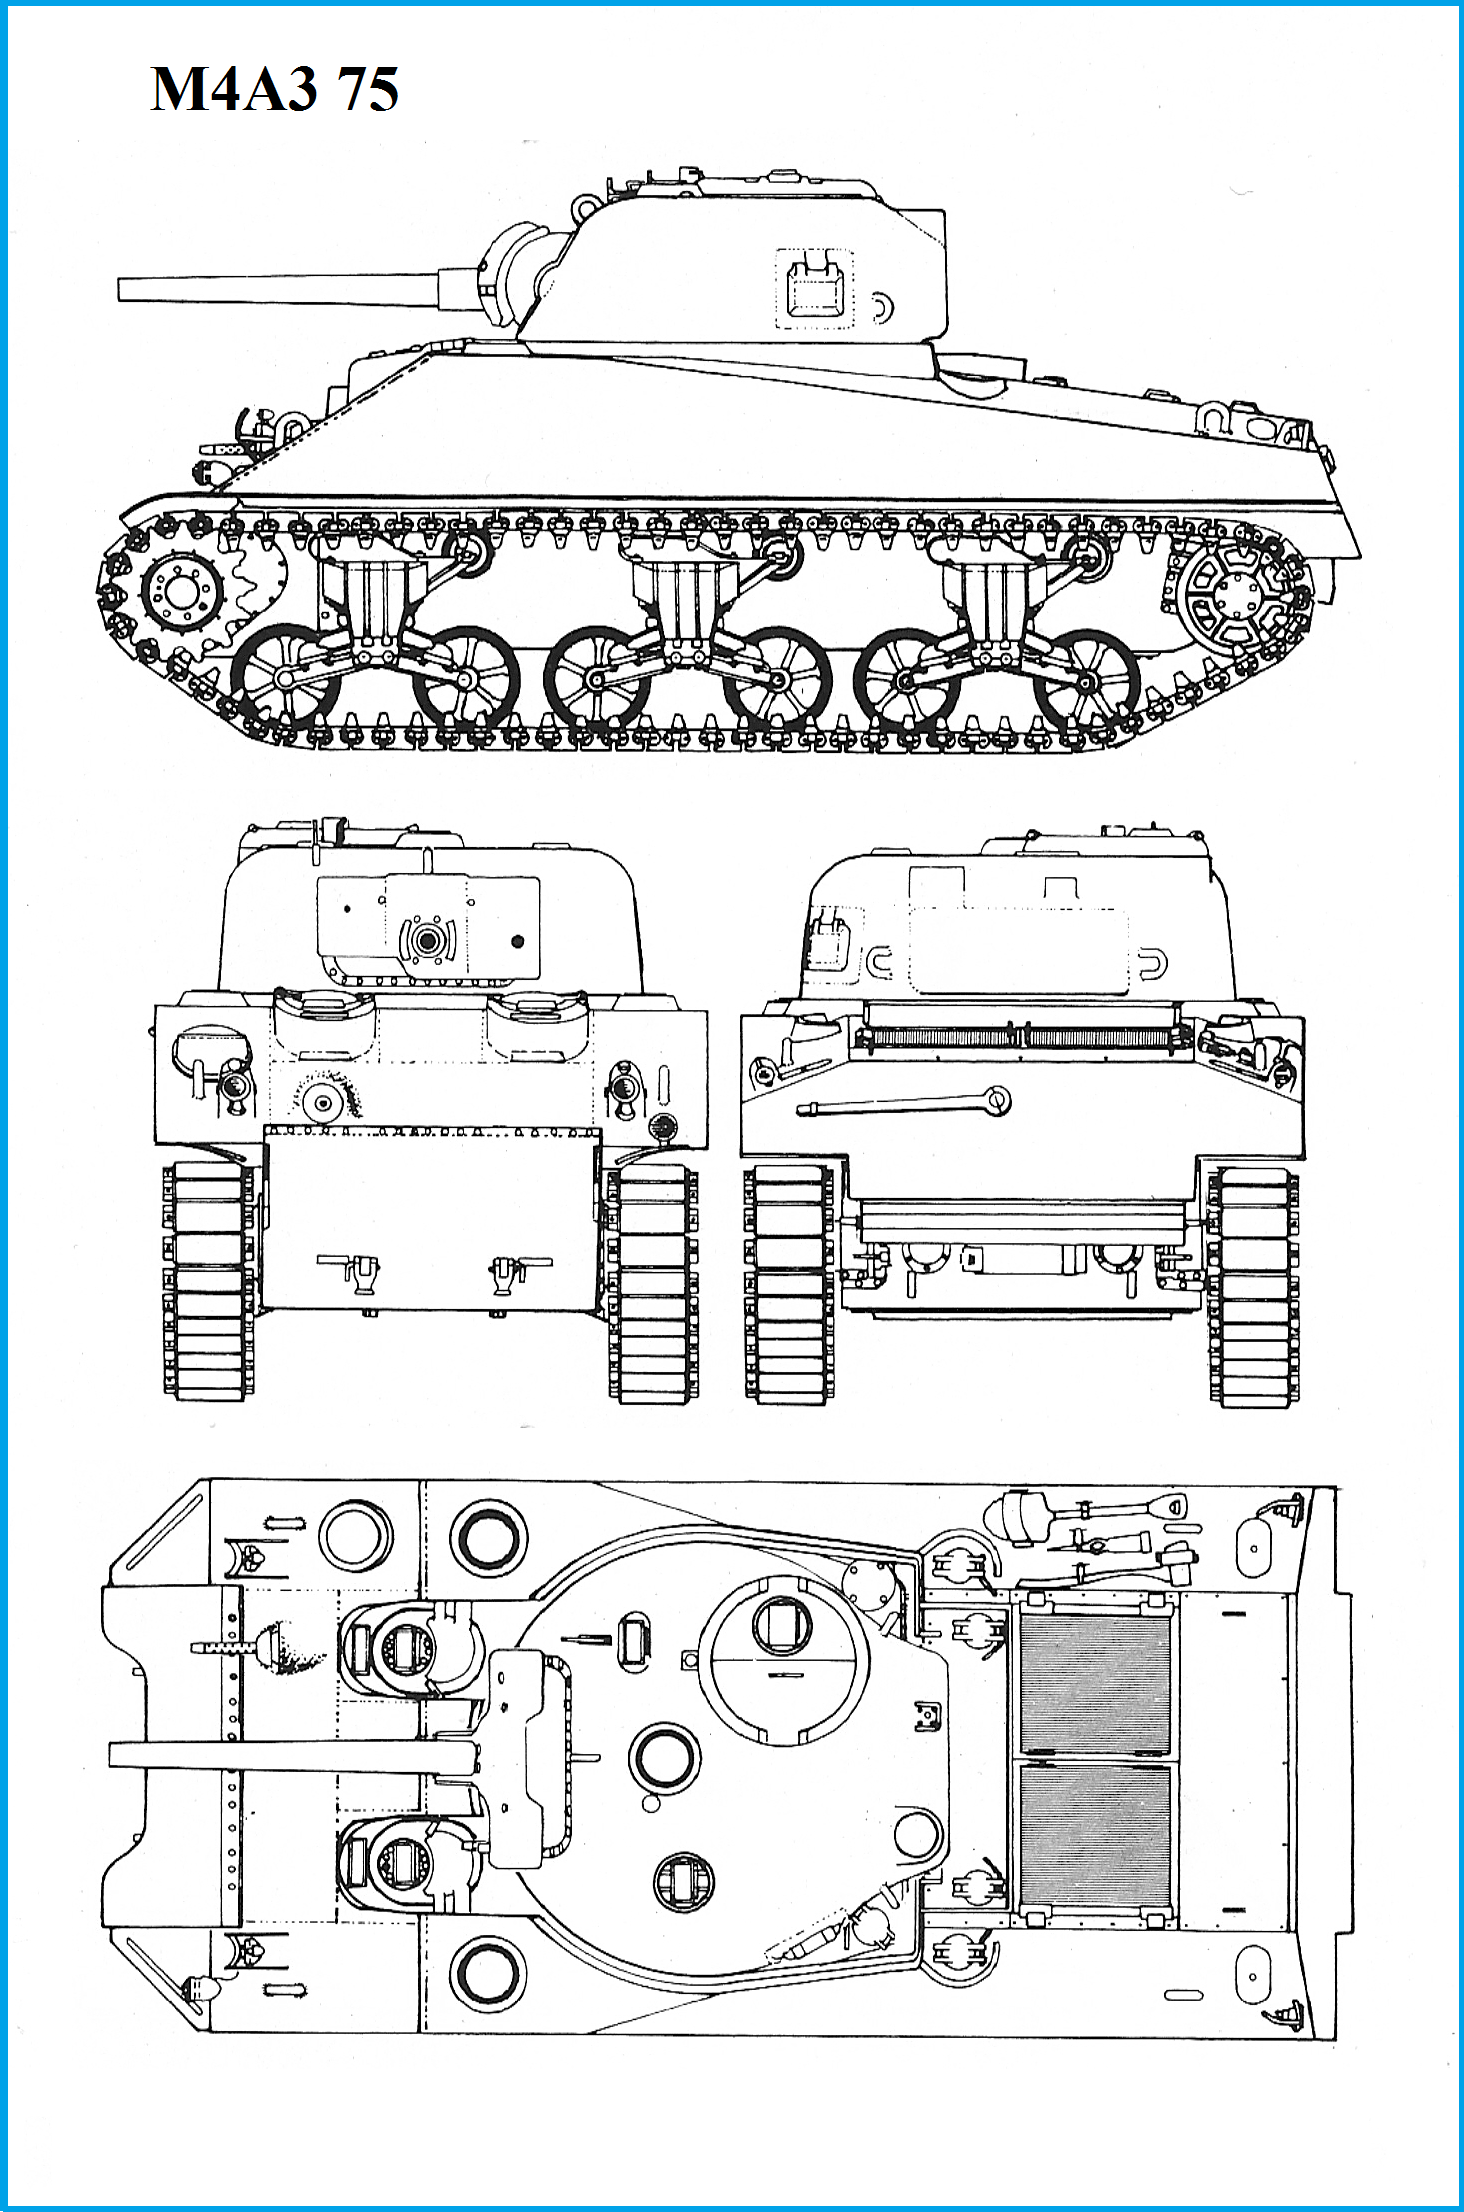 The Sherman M4A1 76W: This first 76 Sherman into Combat in US